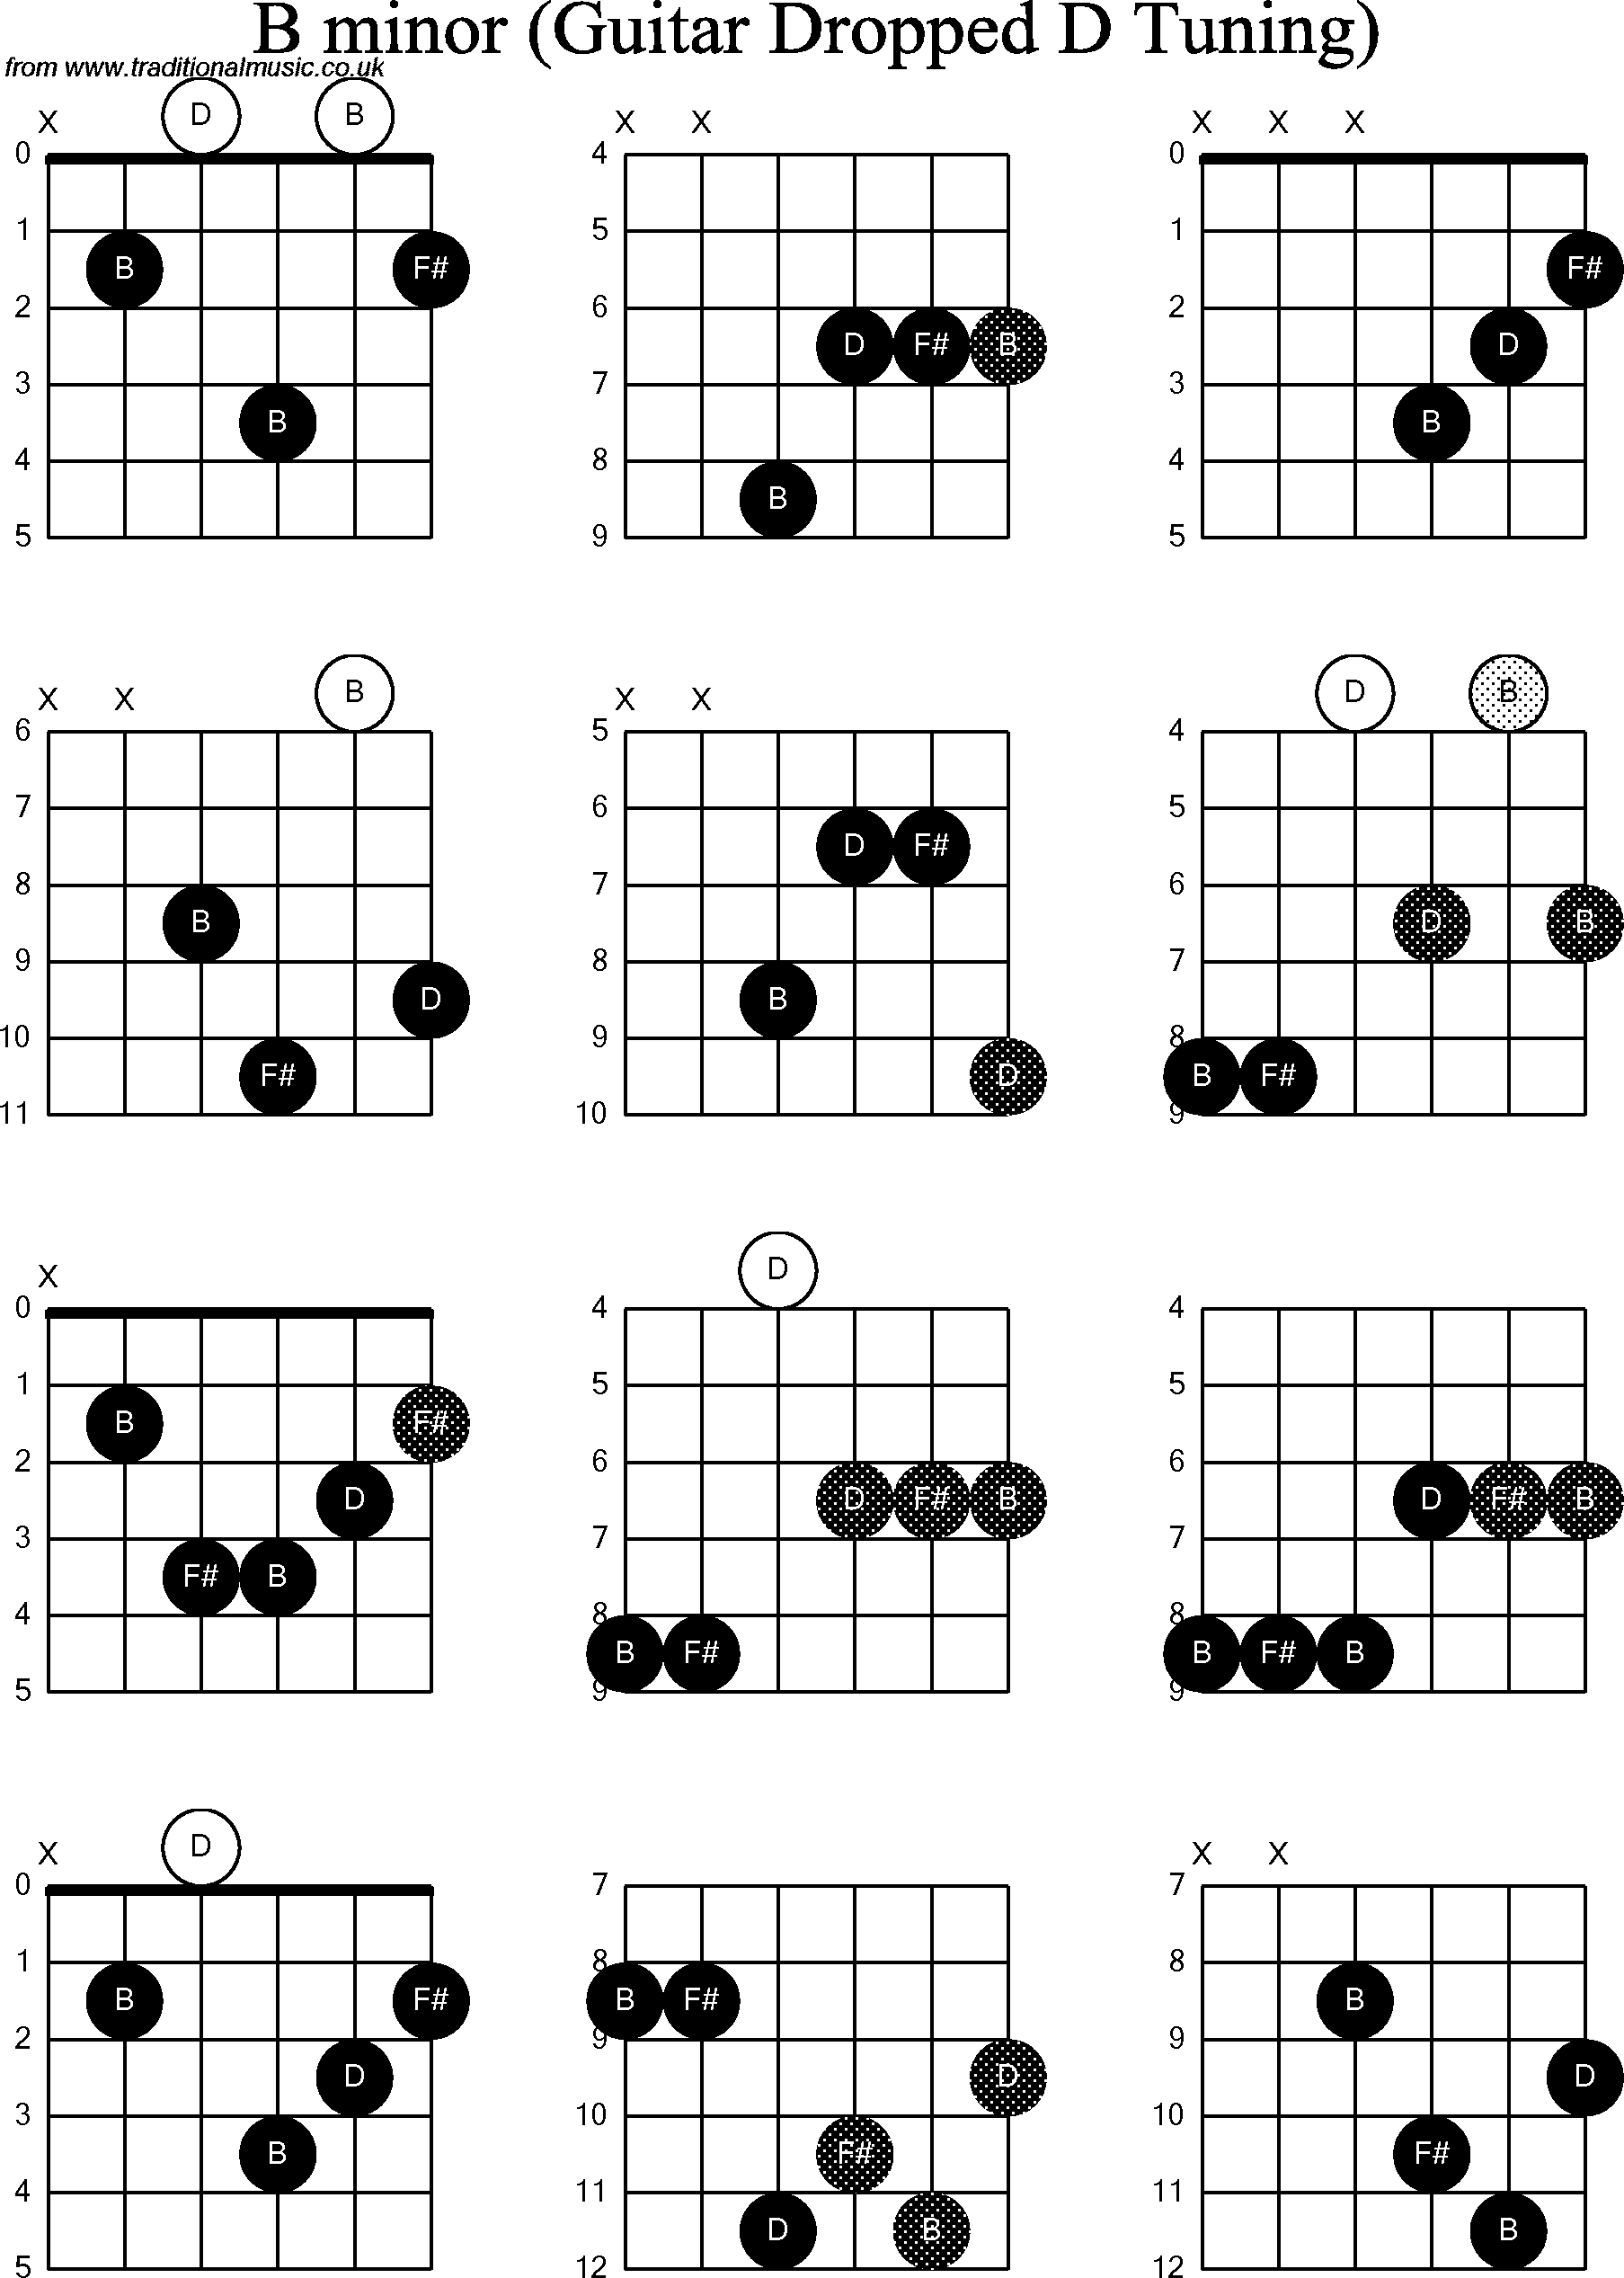 Chord diagrams for dropped D Guitar(DADGBE), B Minor